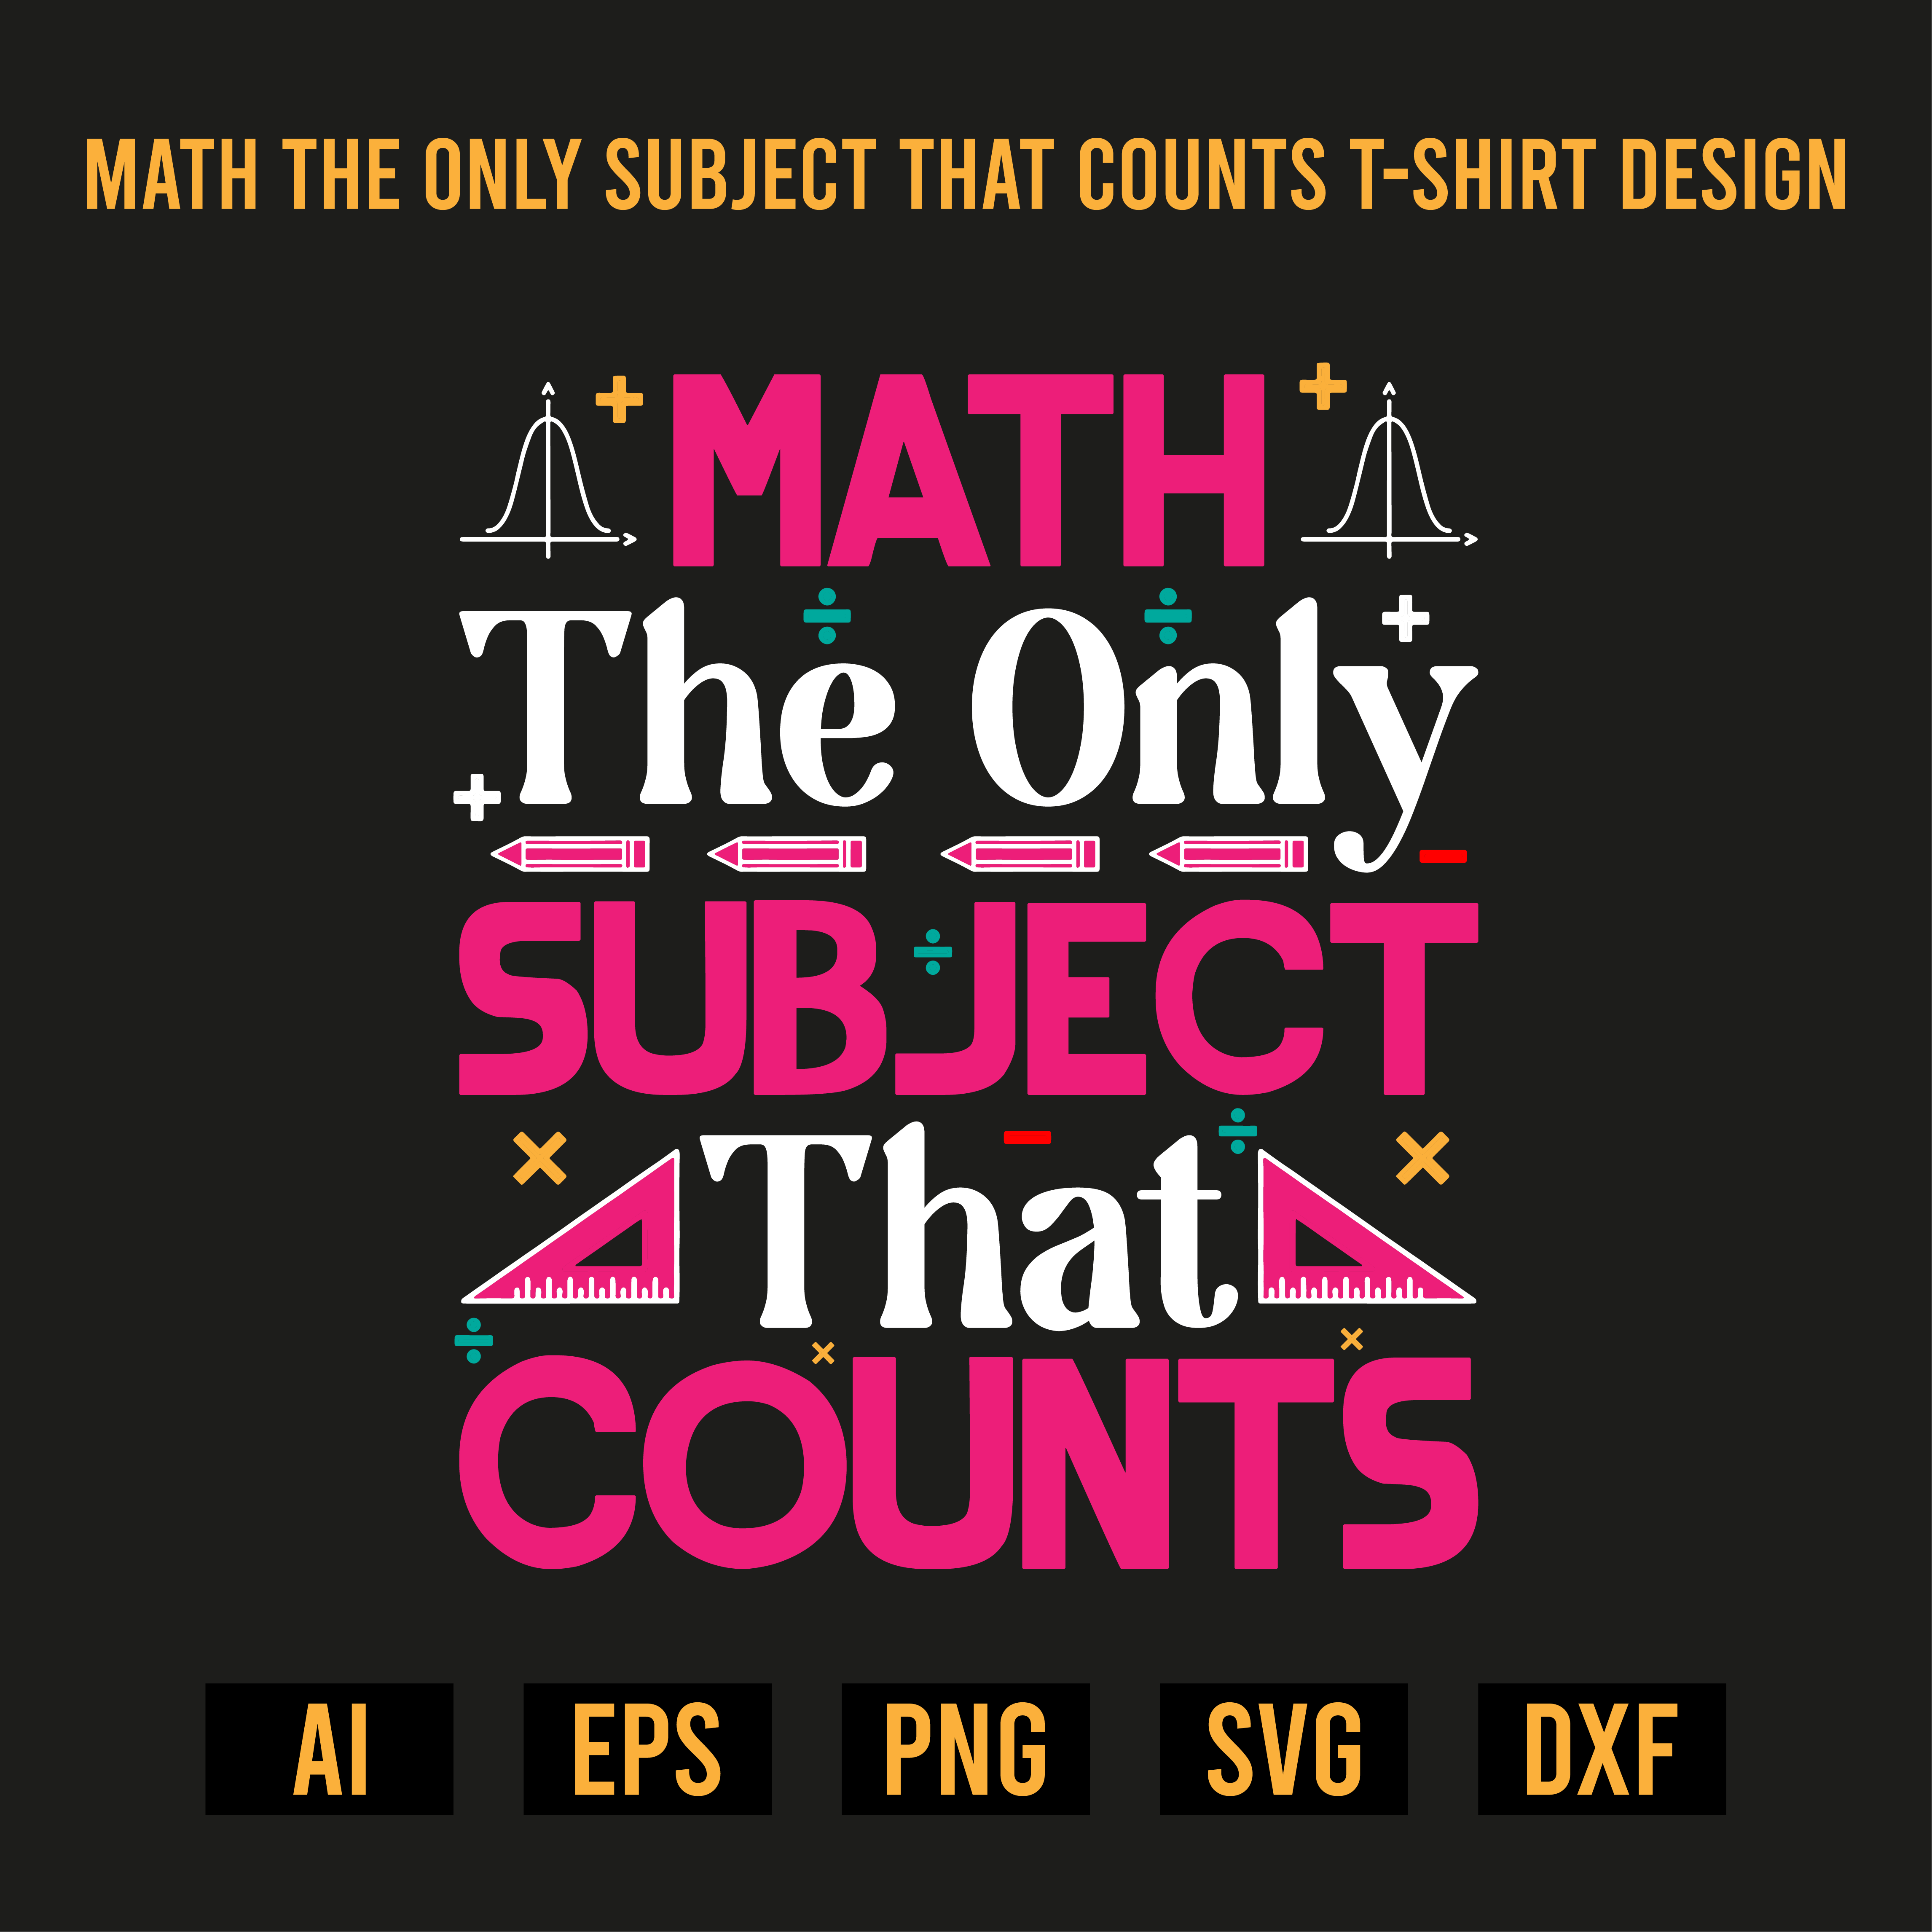 T-Shirt Math The Only Subject That Counts Design cover image.